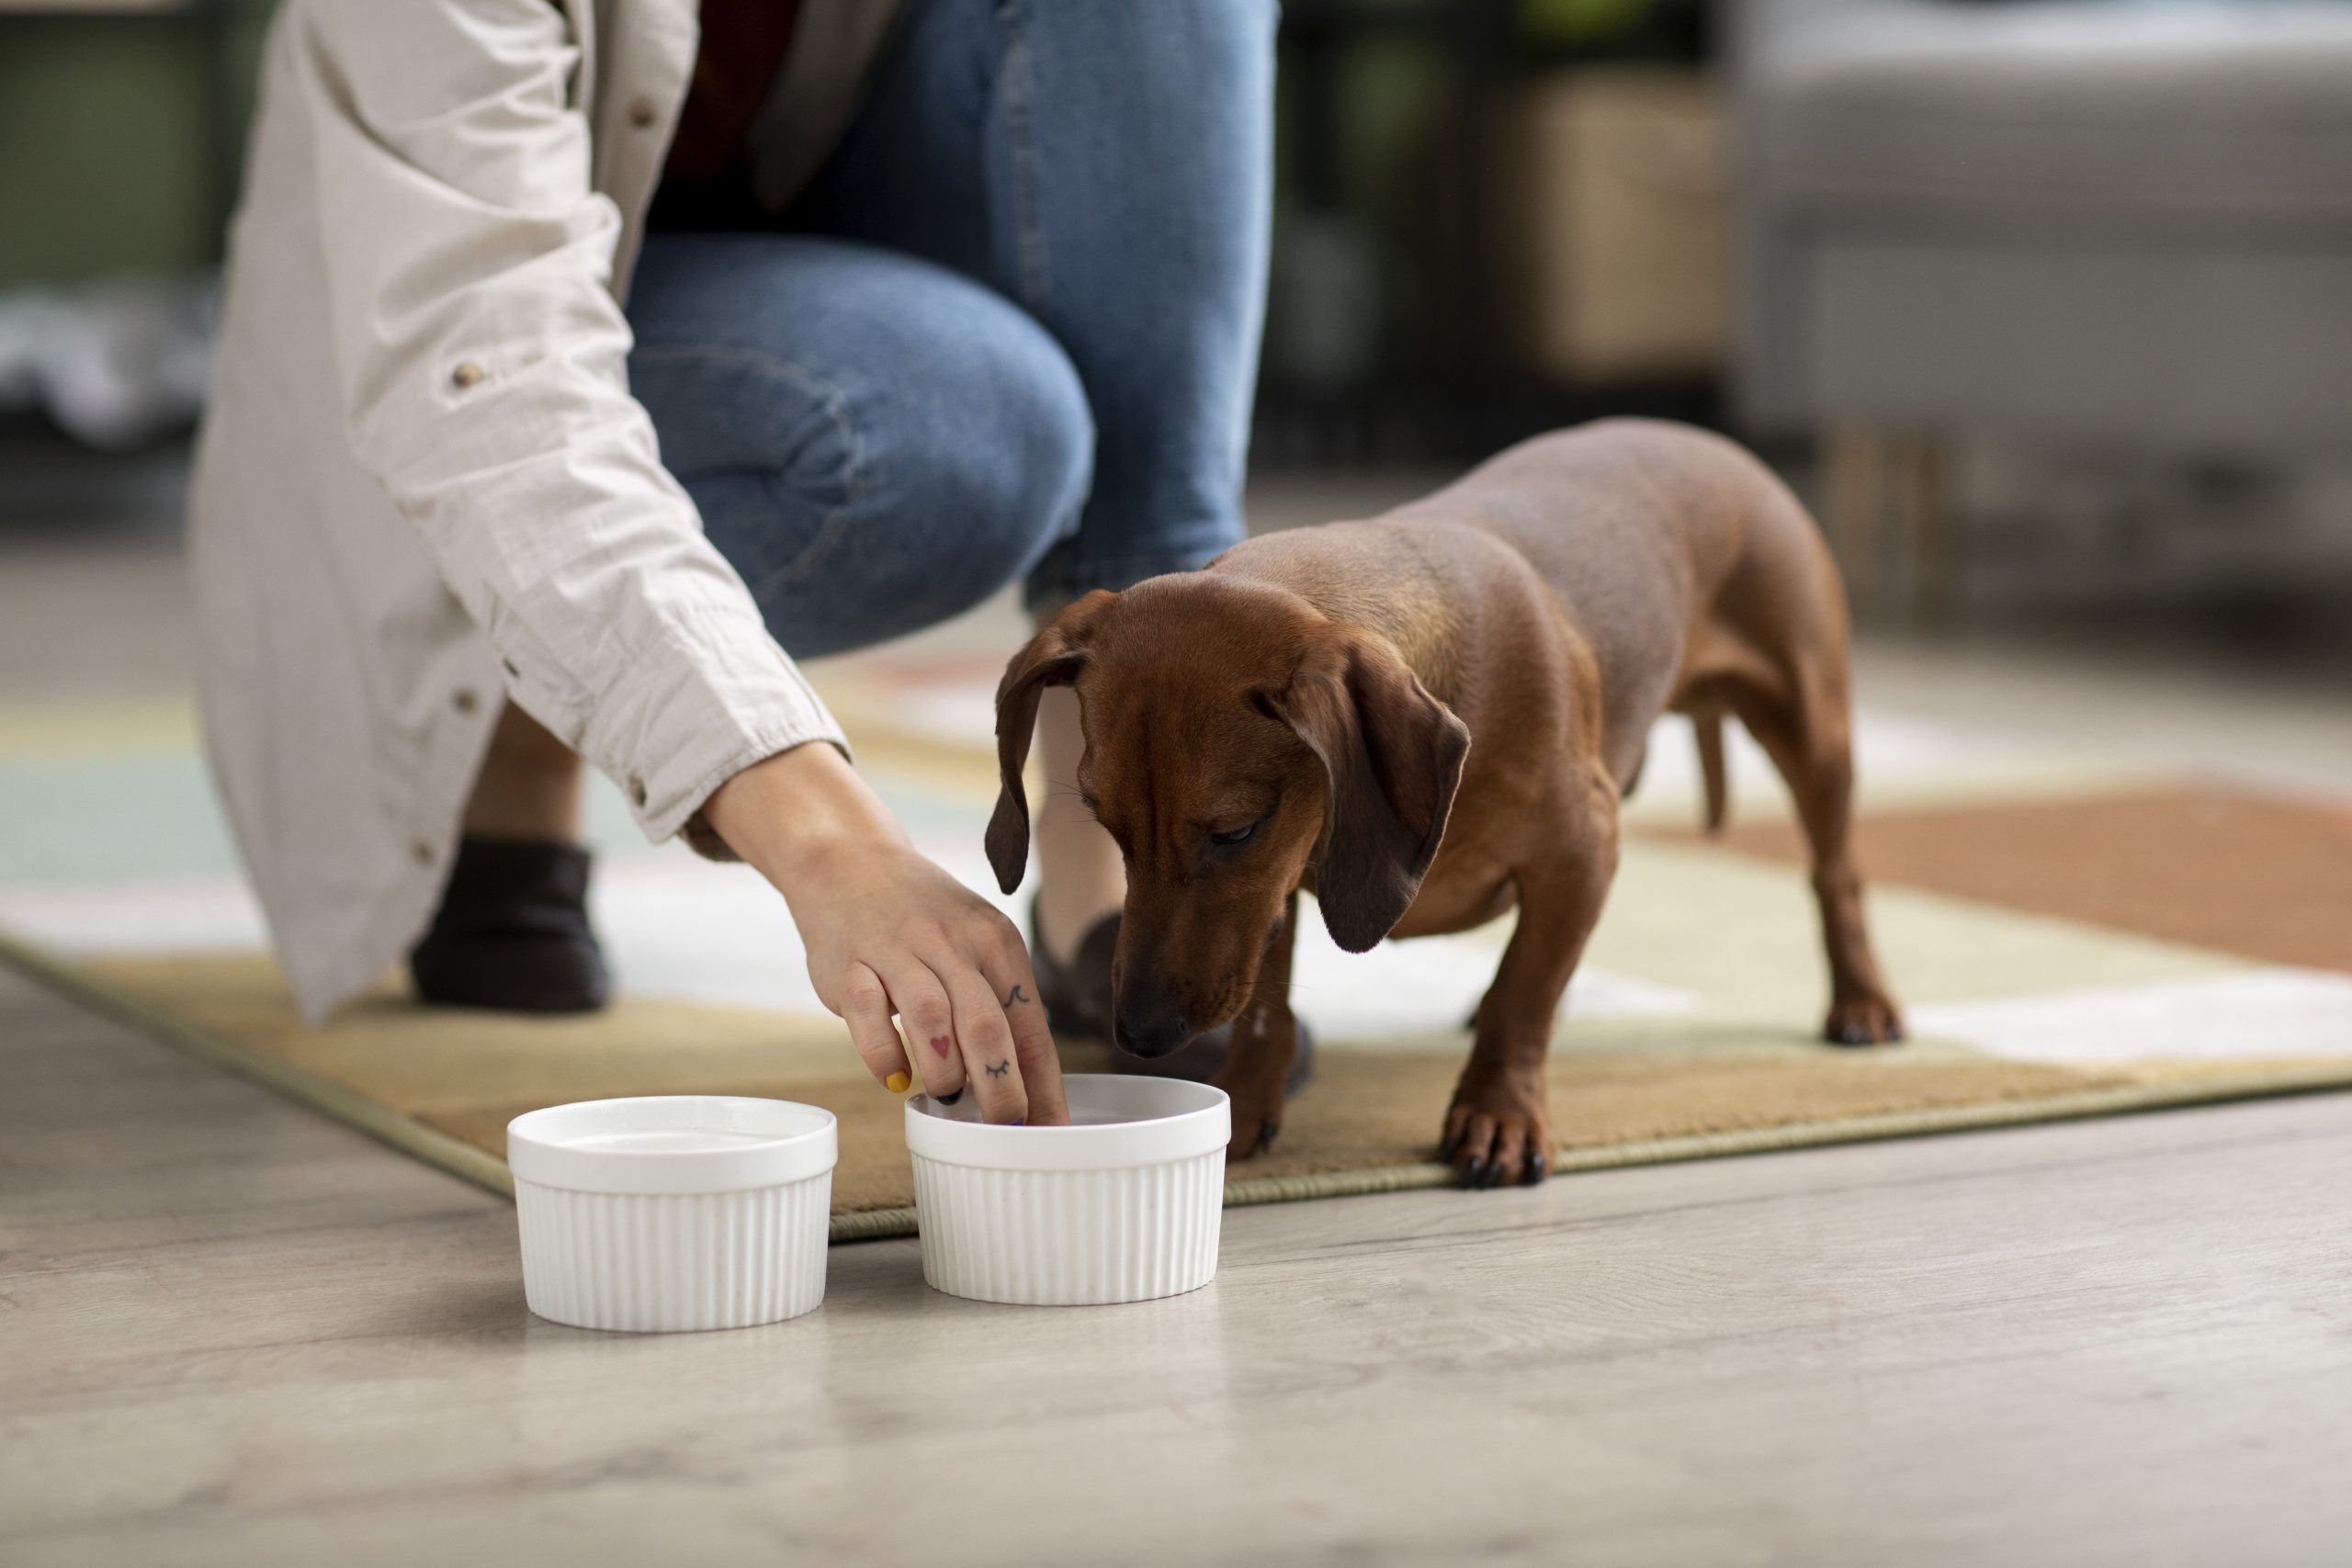 Healthy food for dog